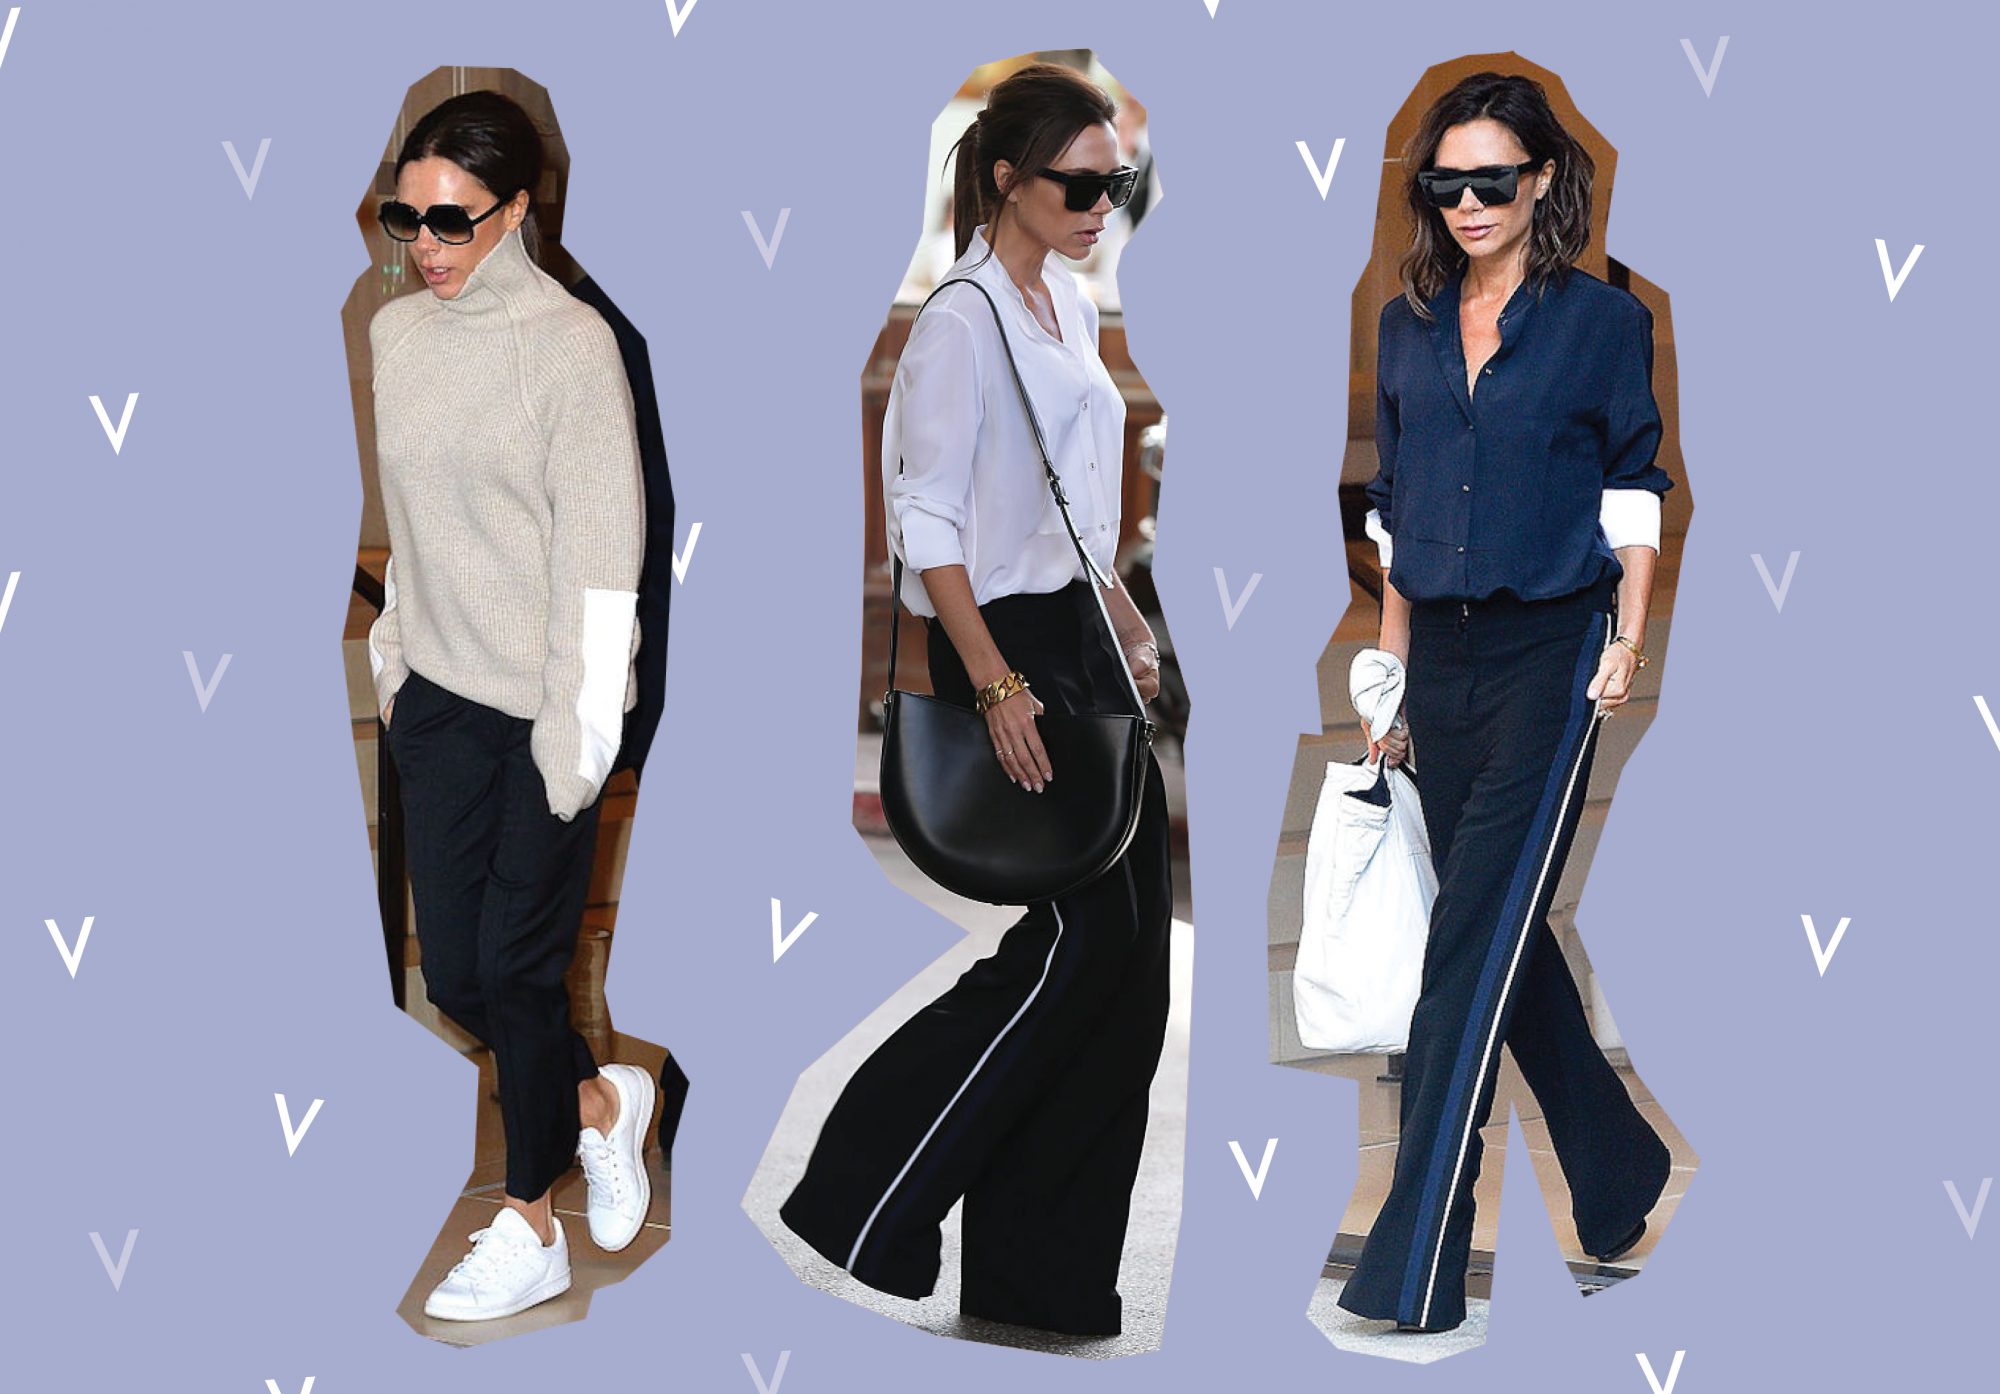 Victoria Beckham's unusual baggy trousers prove she's a fashion